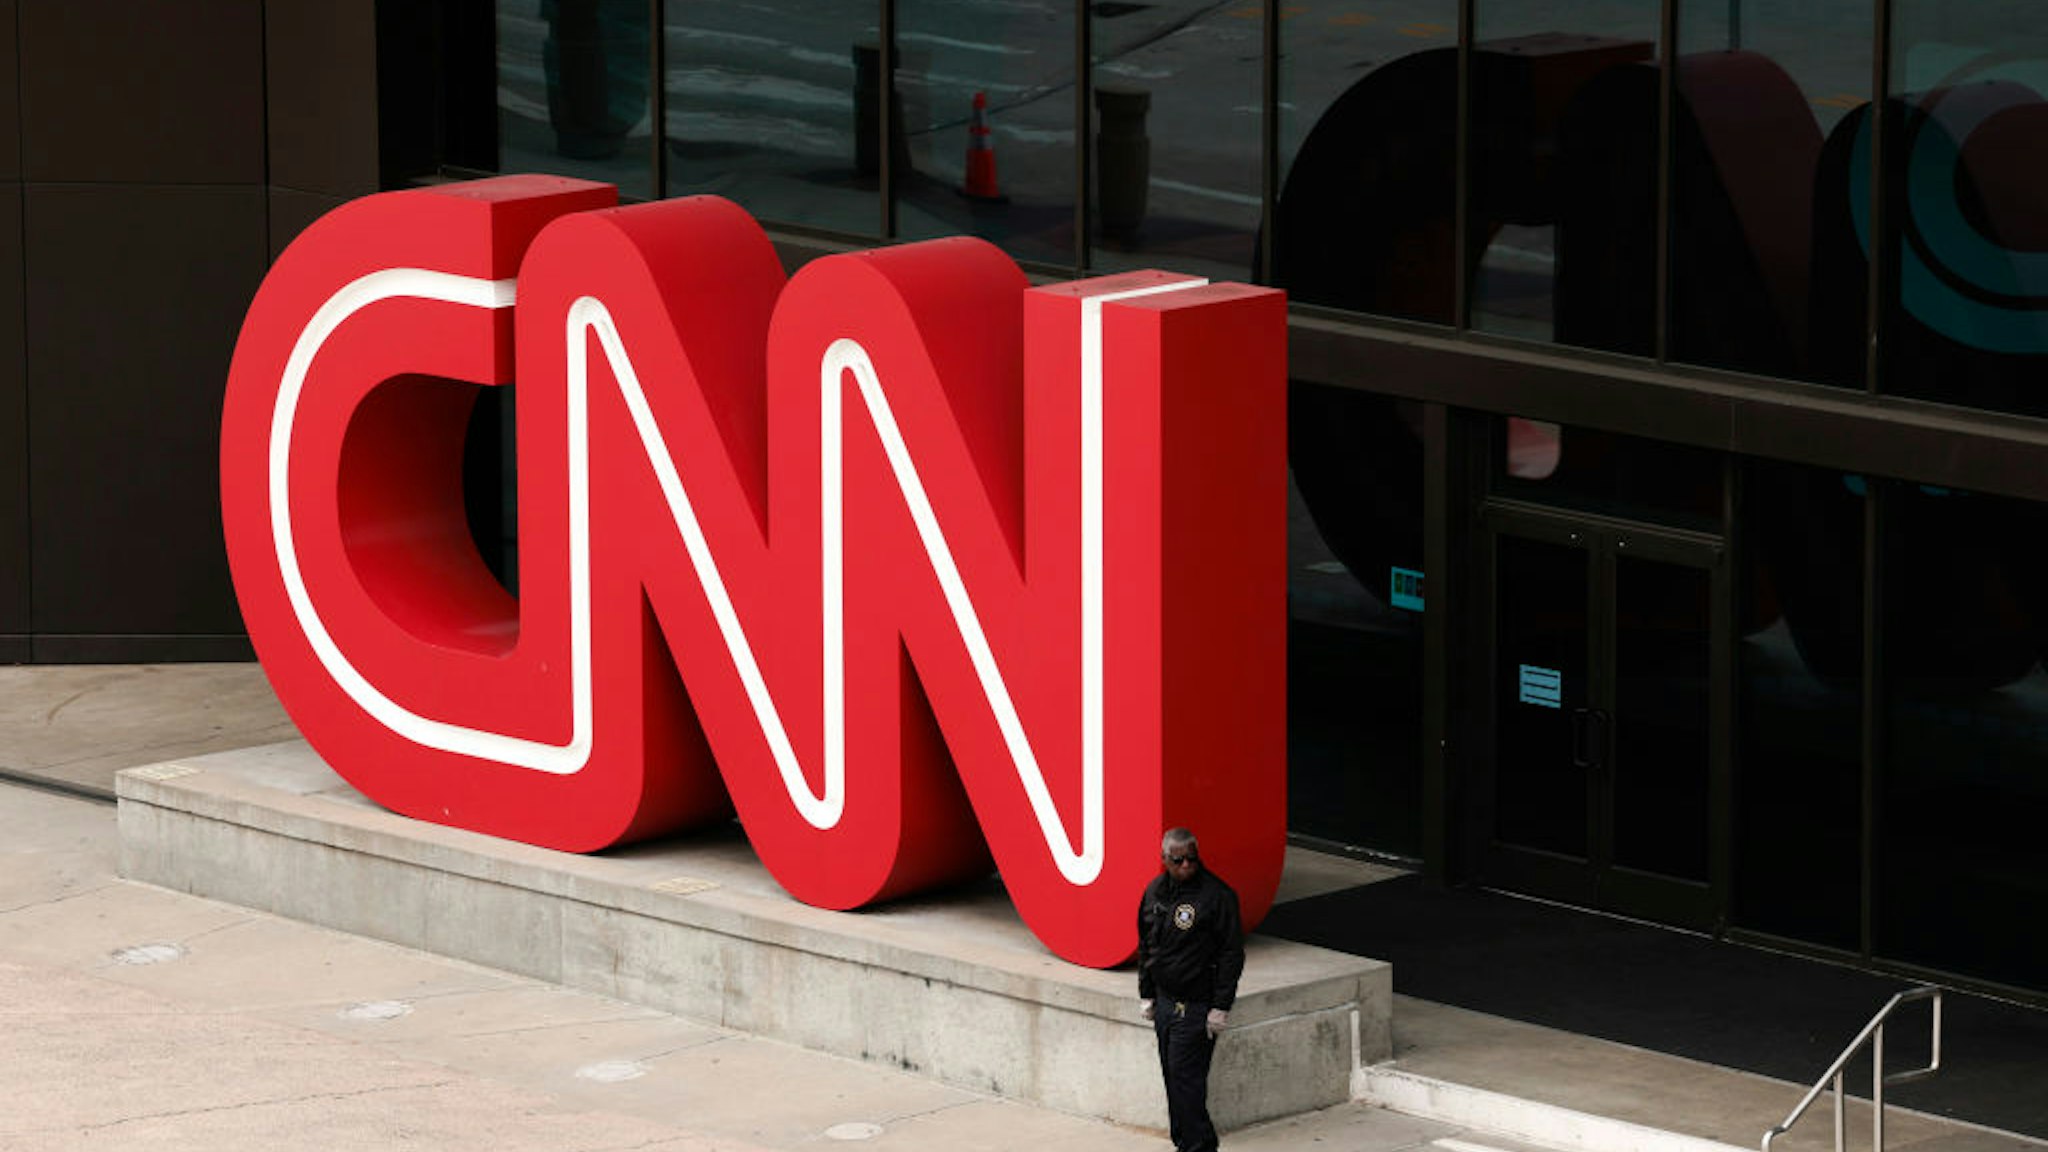 ATLANTA, GEORGIA - MARCH 15: People walk by the world headquarters for the Cable News Network (CNN) on March 15, 2022 in Atlanta, Georgia. Last month CNN's president Jeff Zucker resigned over a consensual, but unreported, relationship with a colleague. Television producer Chris Licht will become the company's new president in April. (Photo by Anna Moneymaker/Getty Images)